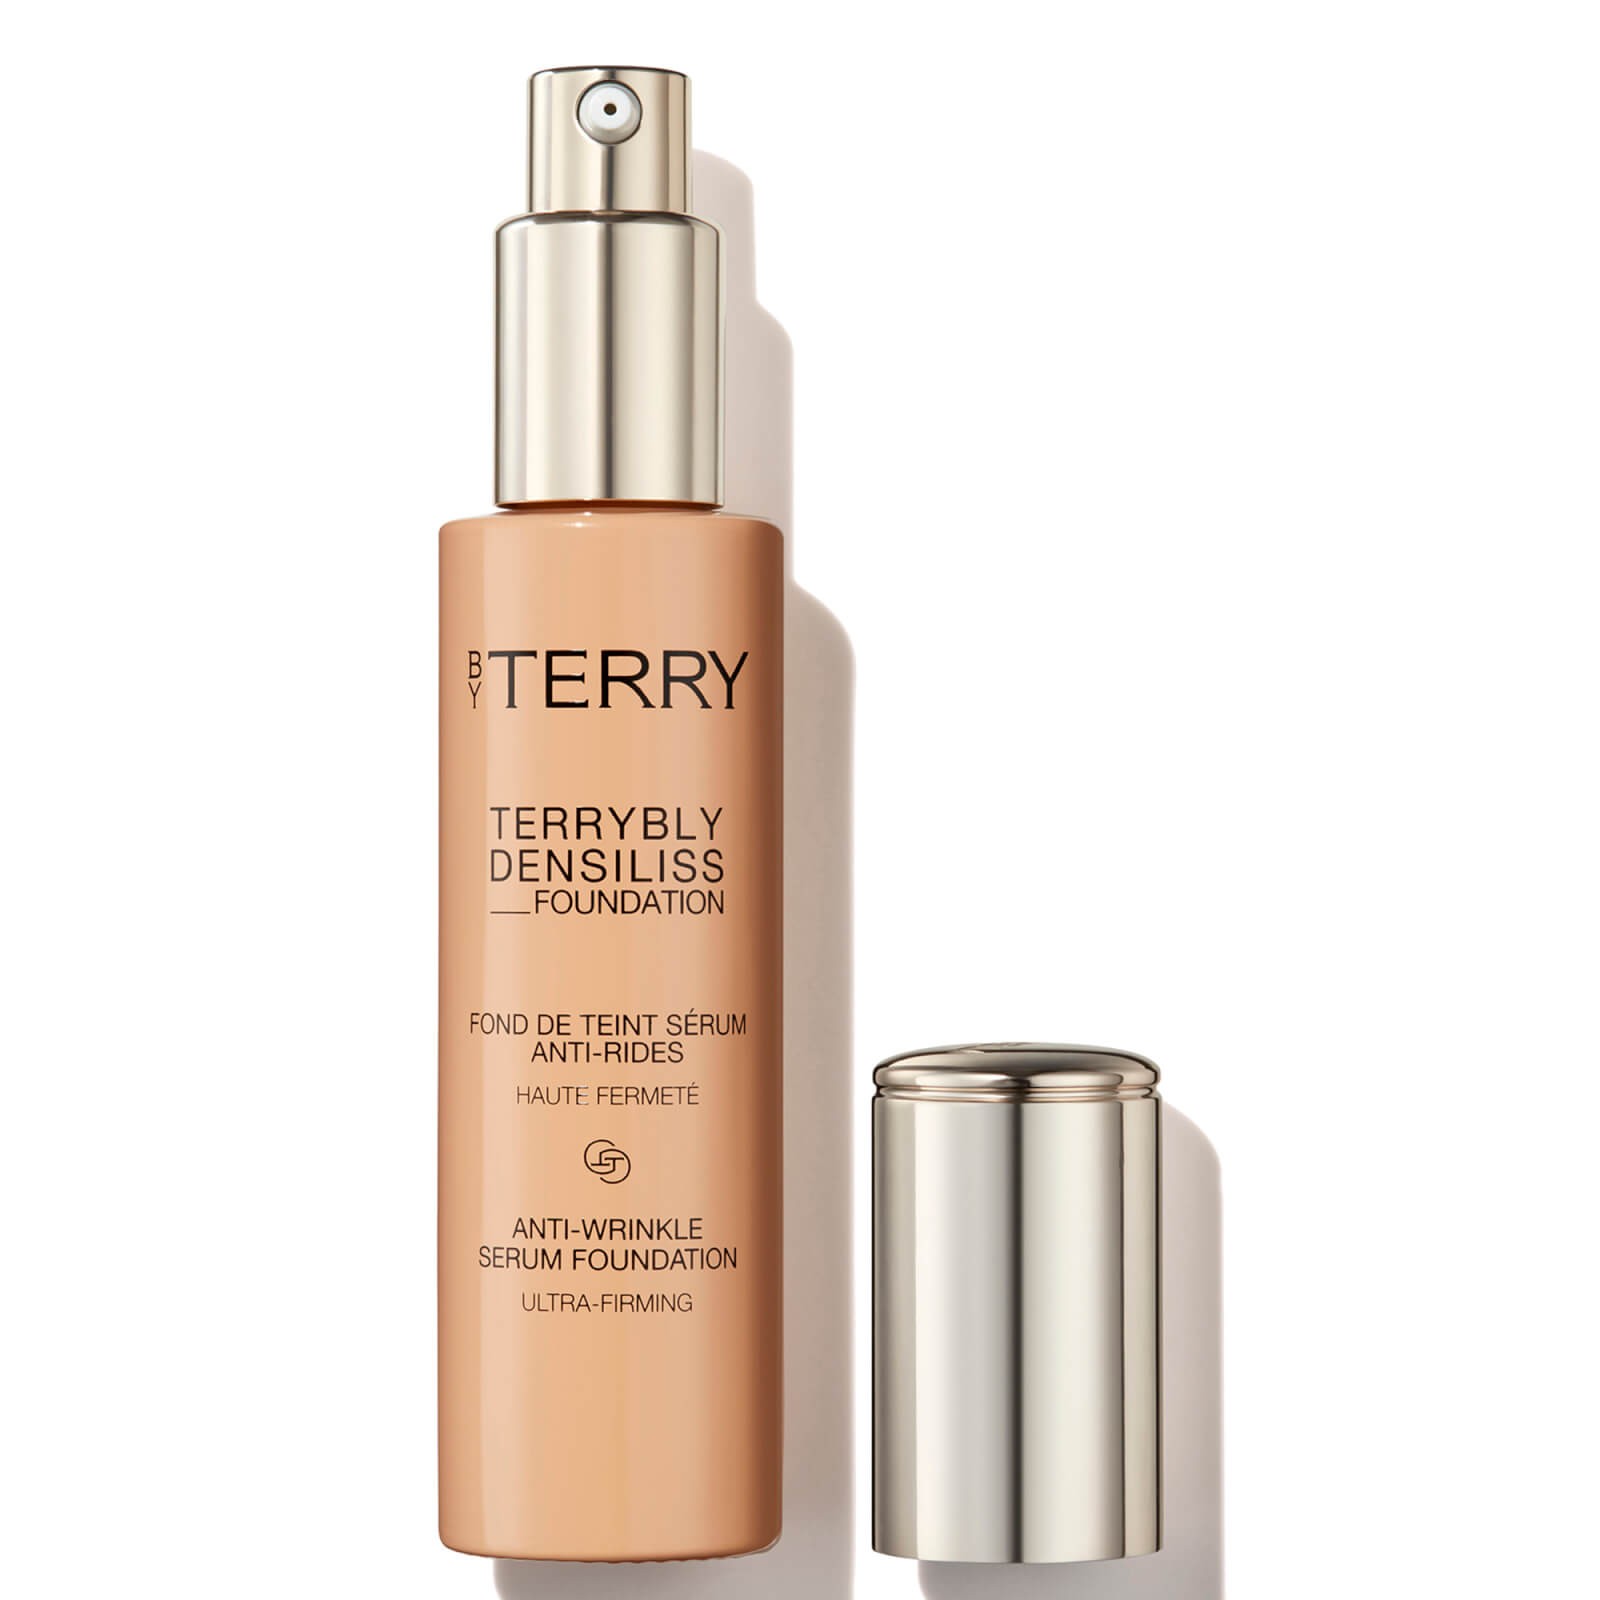 Photos - Foundation & Concealer By Terry Terrybly Densiliss Foundation 30ml  - 10. Deep Eb (Various Shades)